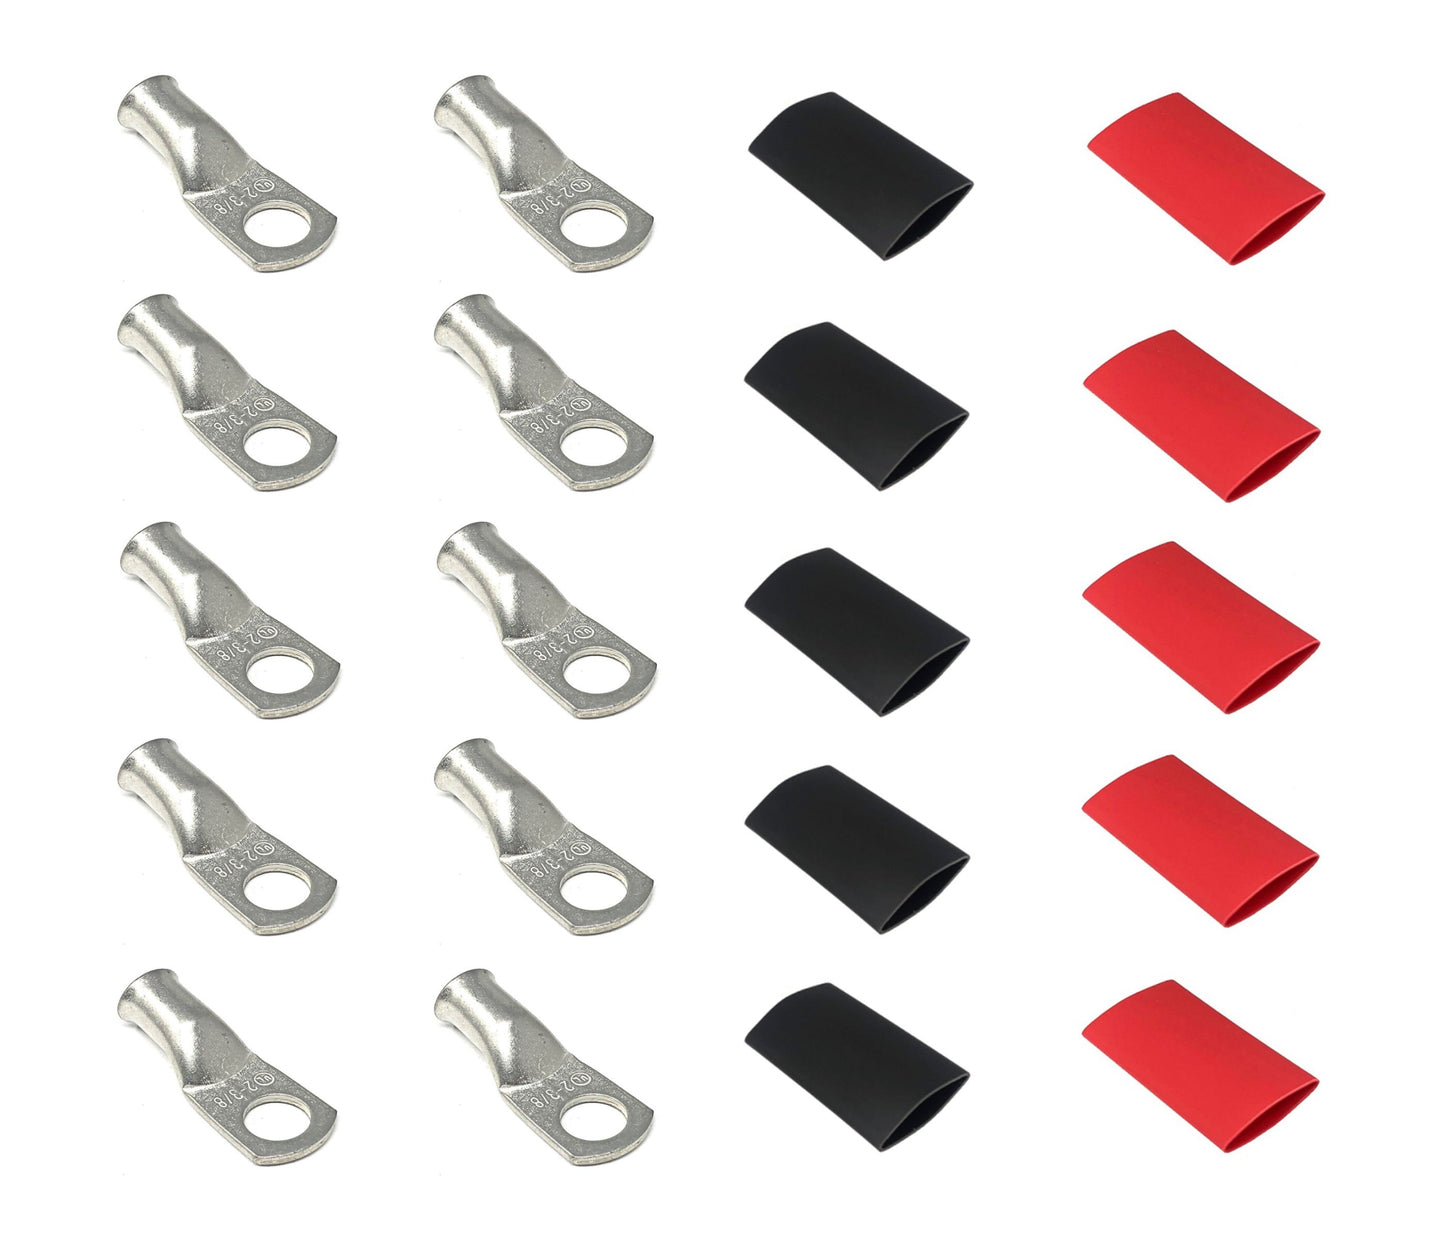 2 Gauge Cable Lugs with Heat Shrink Tubing Kit